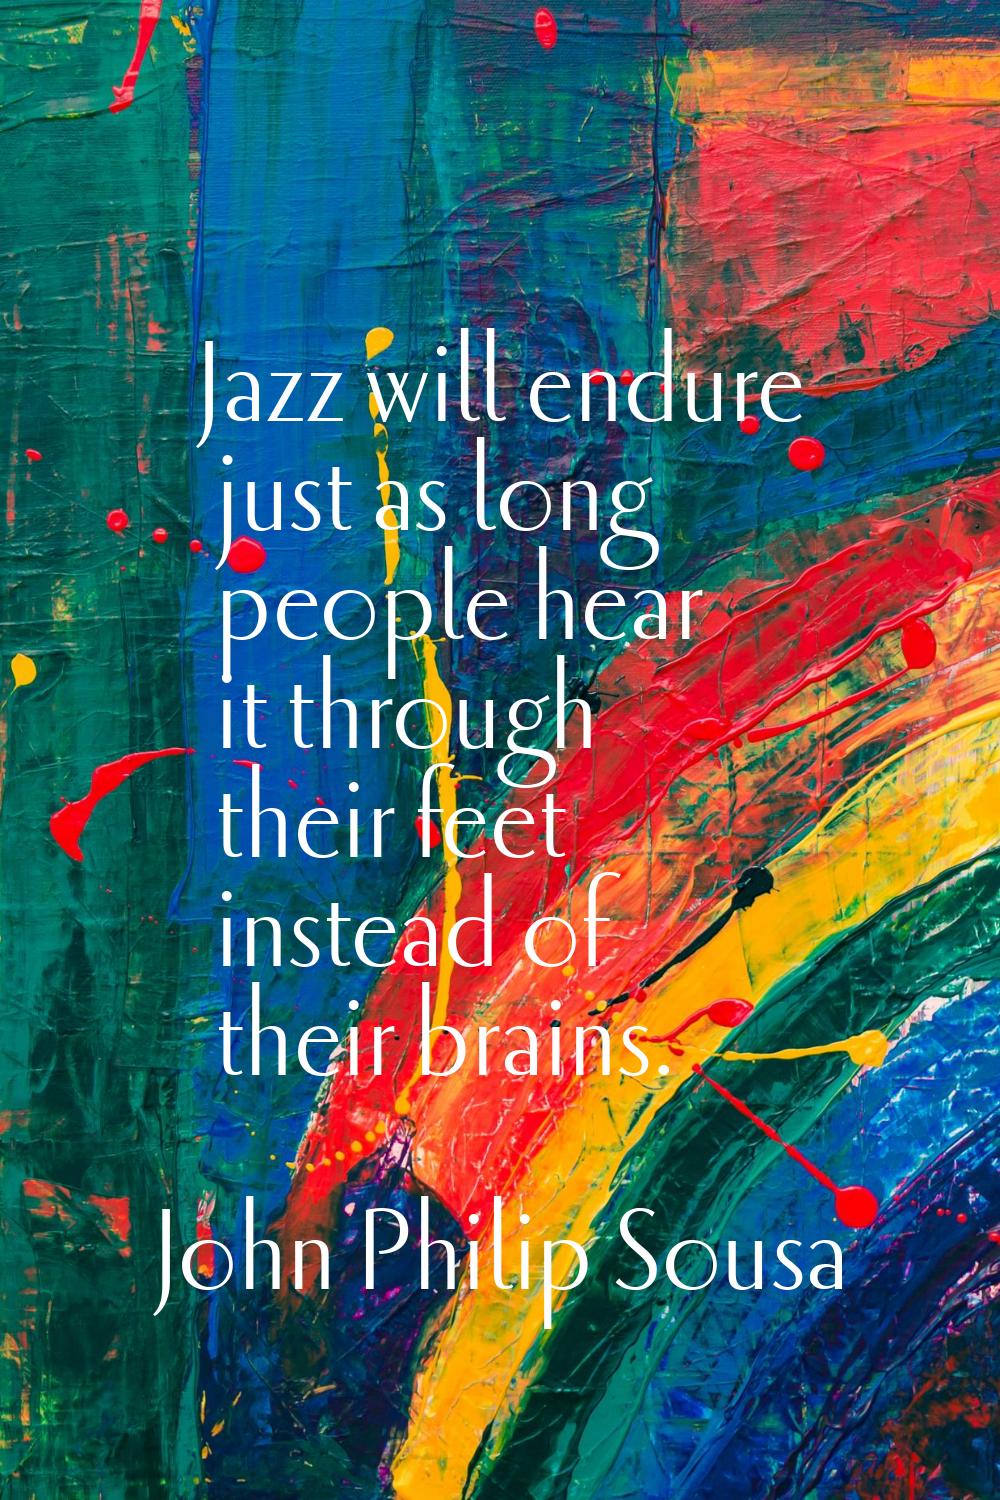 Jazz will endure just as long people hear it through their feet instead of their brains.